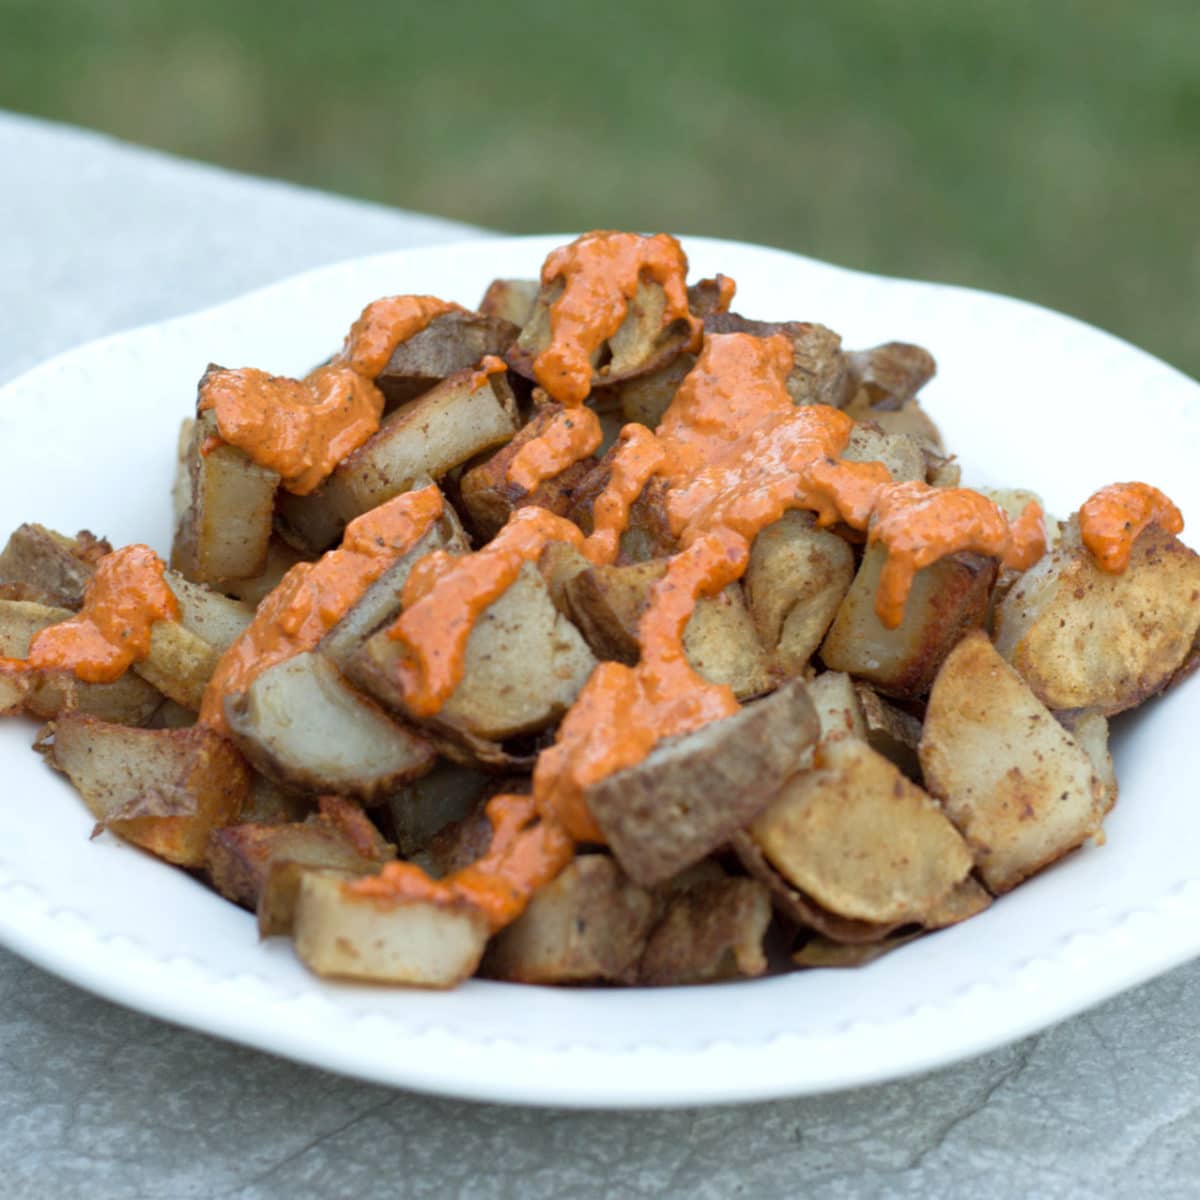 Want an authentic taste of Spain? Make these amazing patatas bravas. Potatoes with a beautiful spicy paprika sauce. 